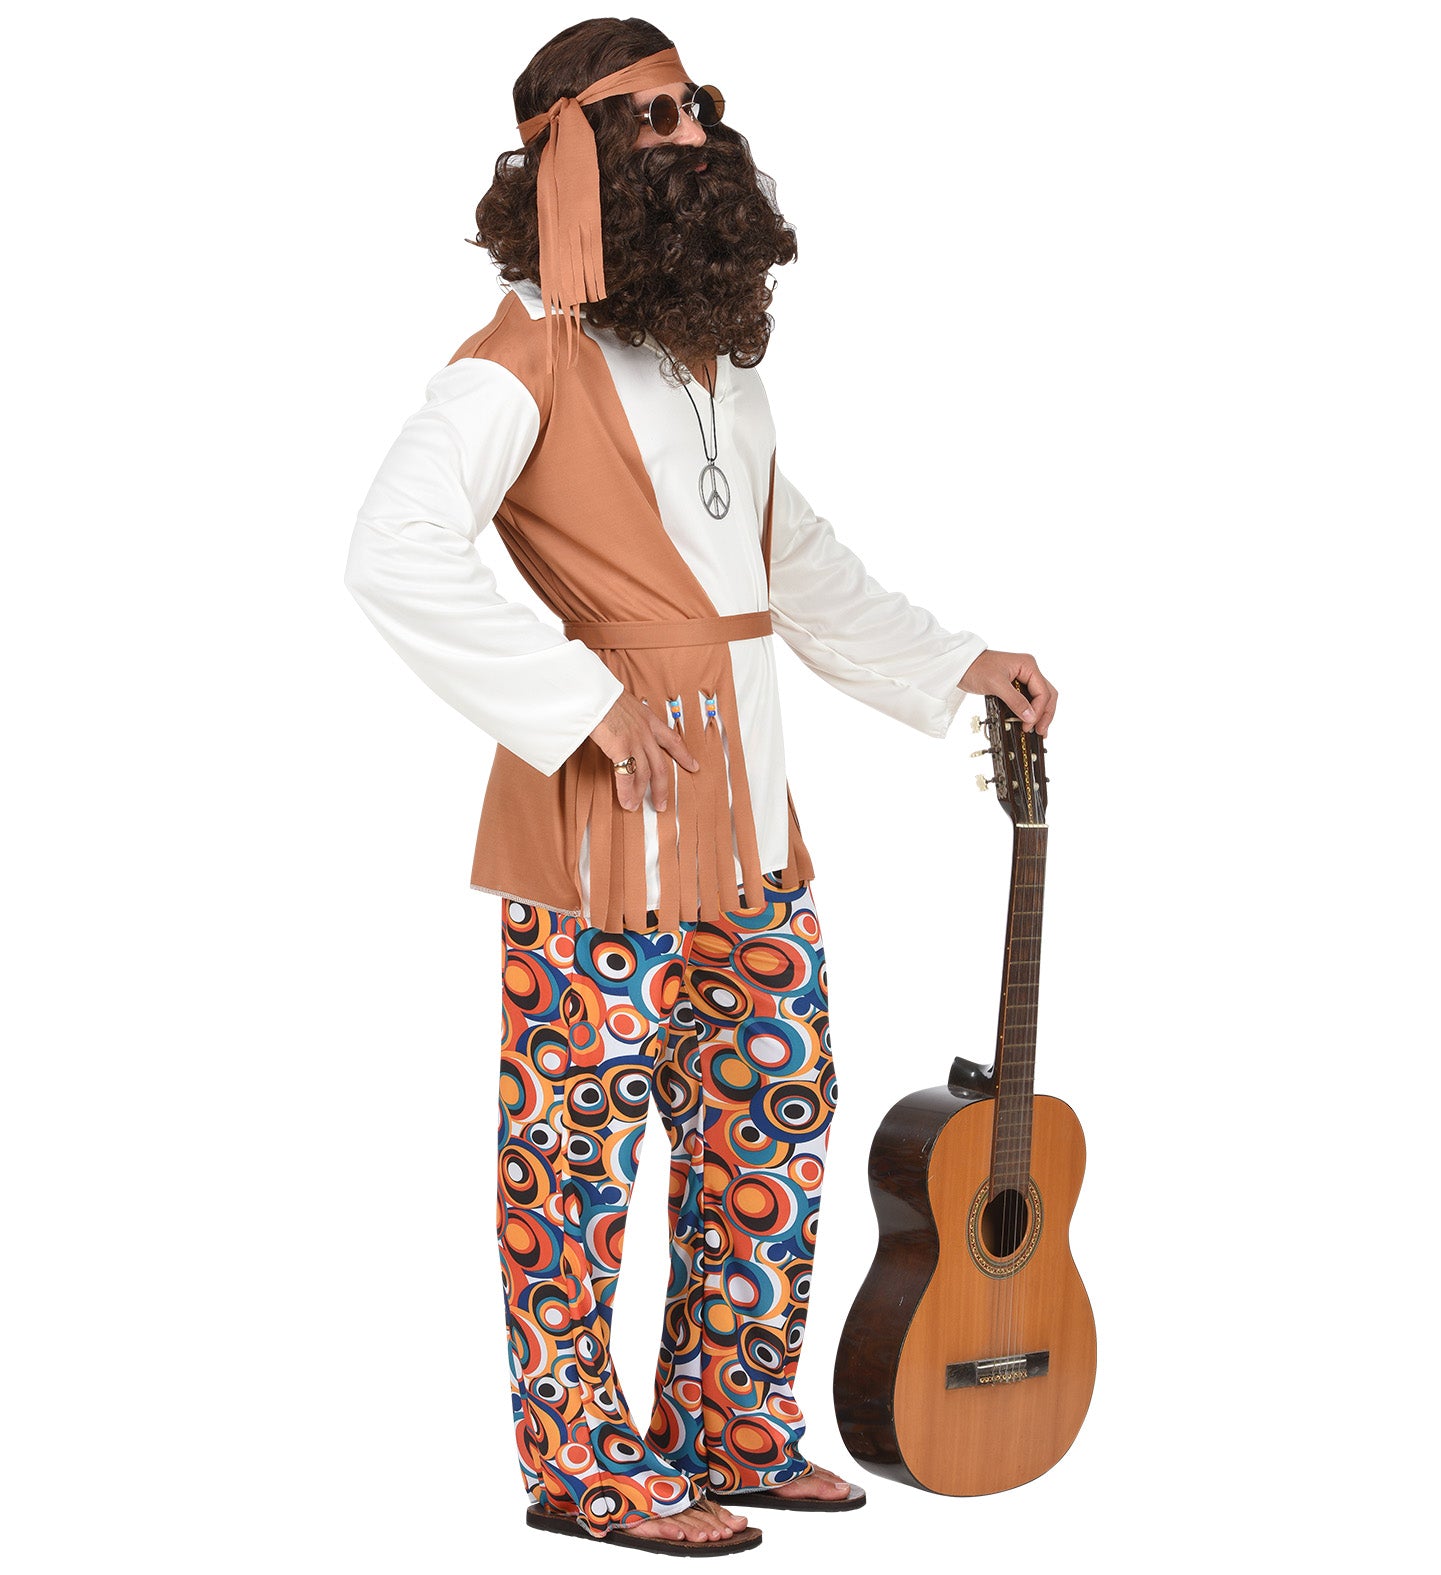 Far Out Dude Hippie Costume for men